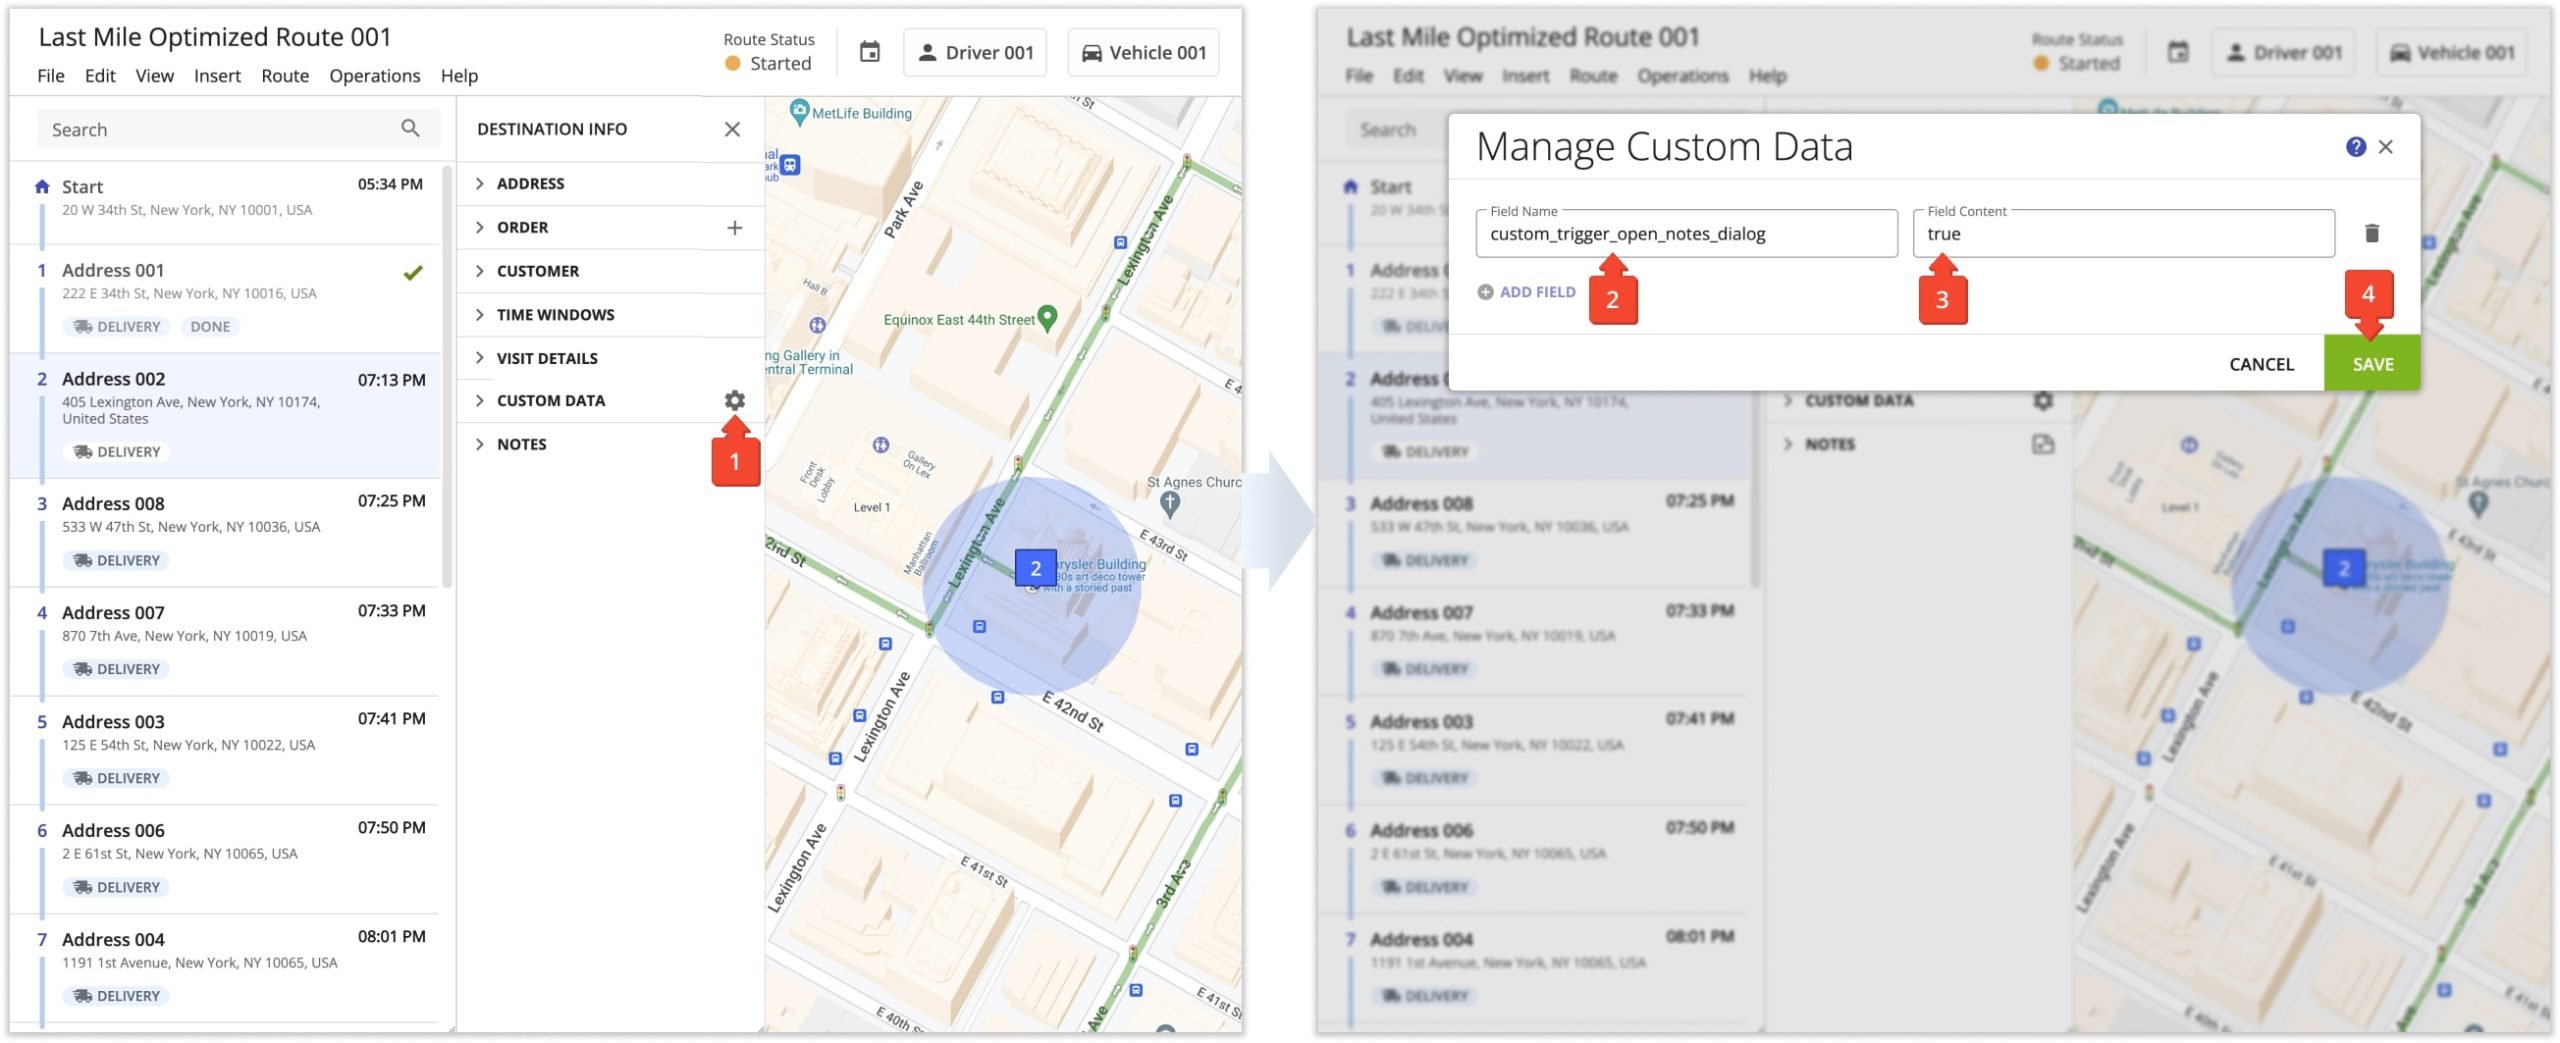 When a route is planned, you can still enable automatic driver geofence-triggered notifications to add notes by adding the corresponding value as custom data to each destination.